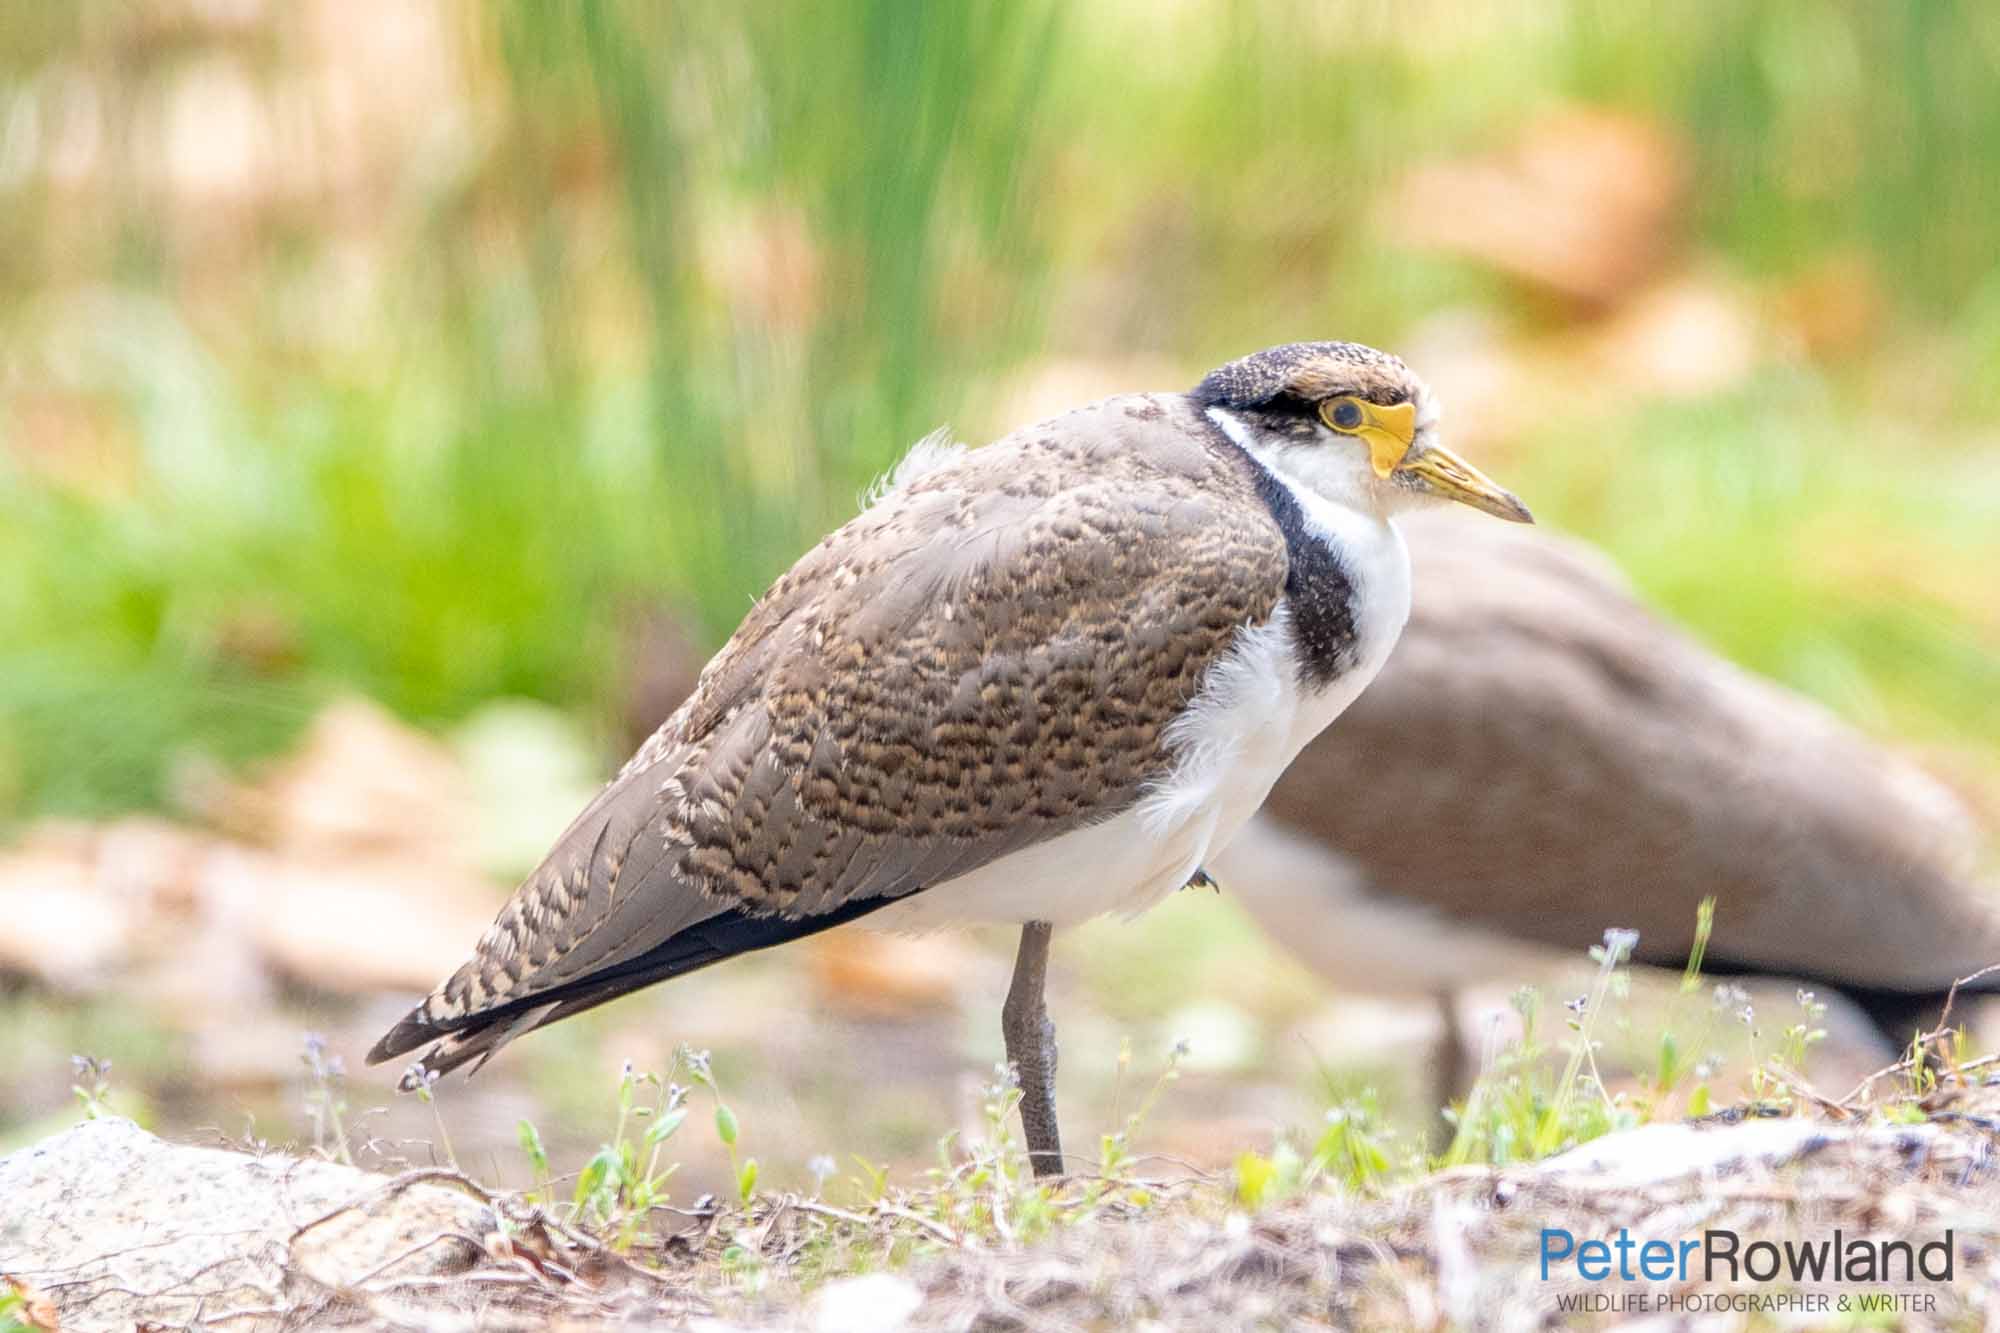 A young Masked Lapwing (northern subspecies) with a blend of young and adult plumage. [Photographed by Peter Rowland]